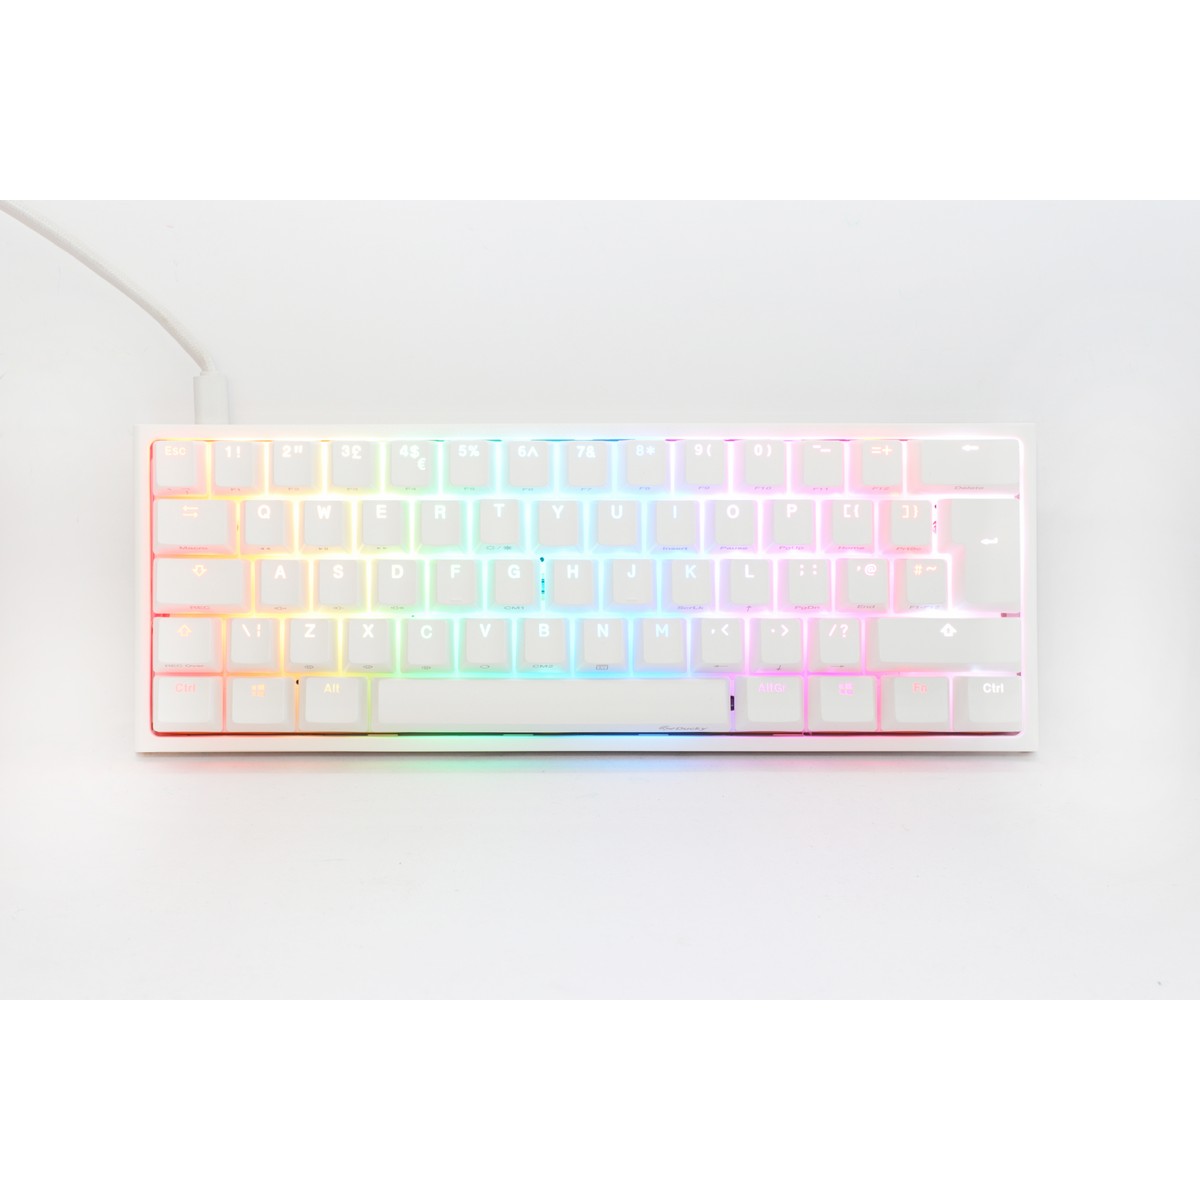 Ducky One 2 Pro Mini 60% Mechanical Gaming Keyboard MX Cherry Silent Red Switch White Frame - UK Layout